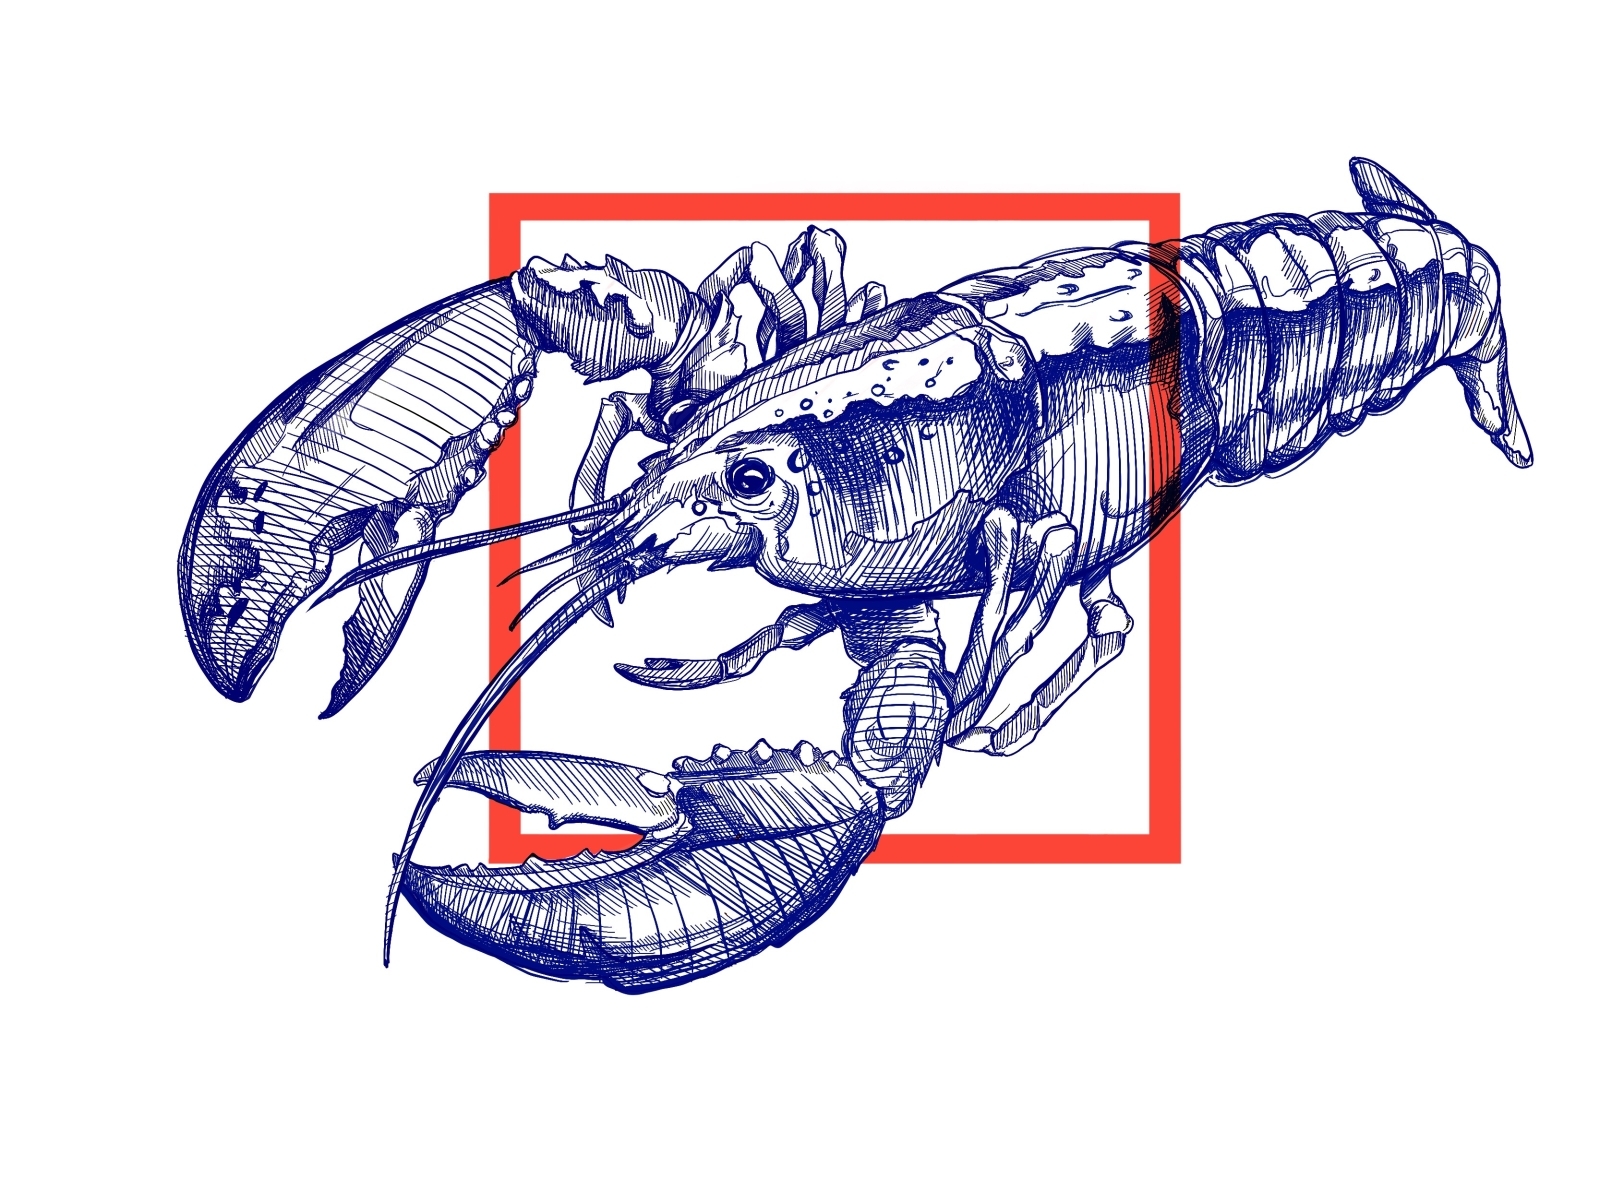 Lobster Drawing (study) by Maiha on Dribbble